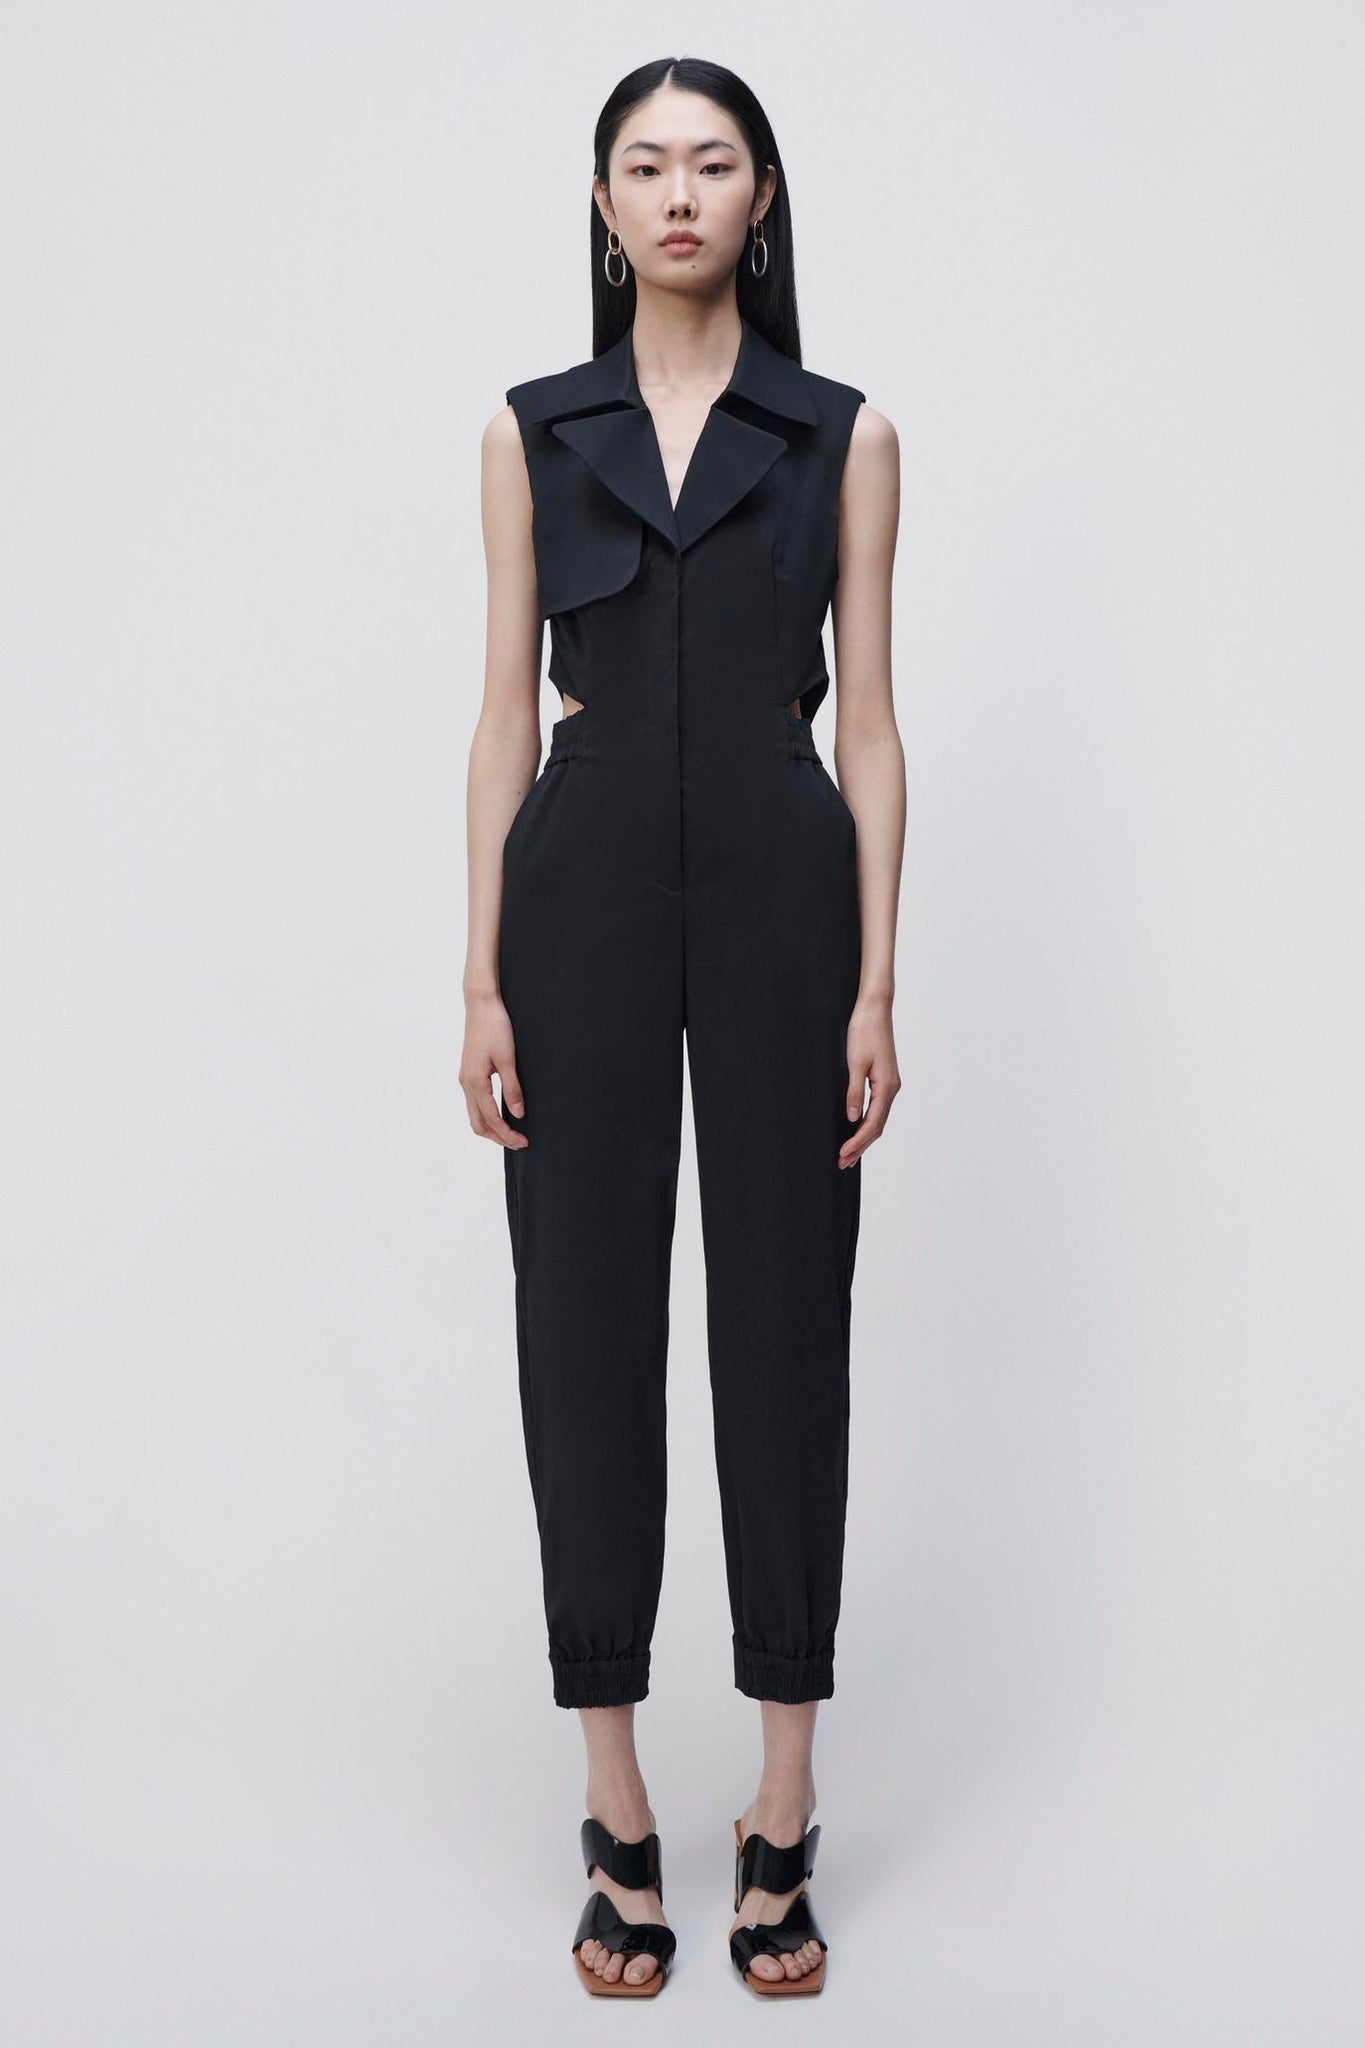 Rayley Trench Jumpsuit - SIMKHAI 